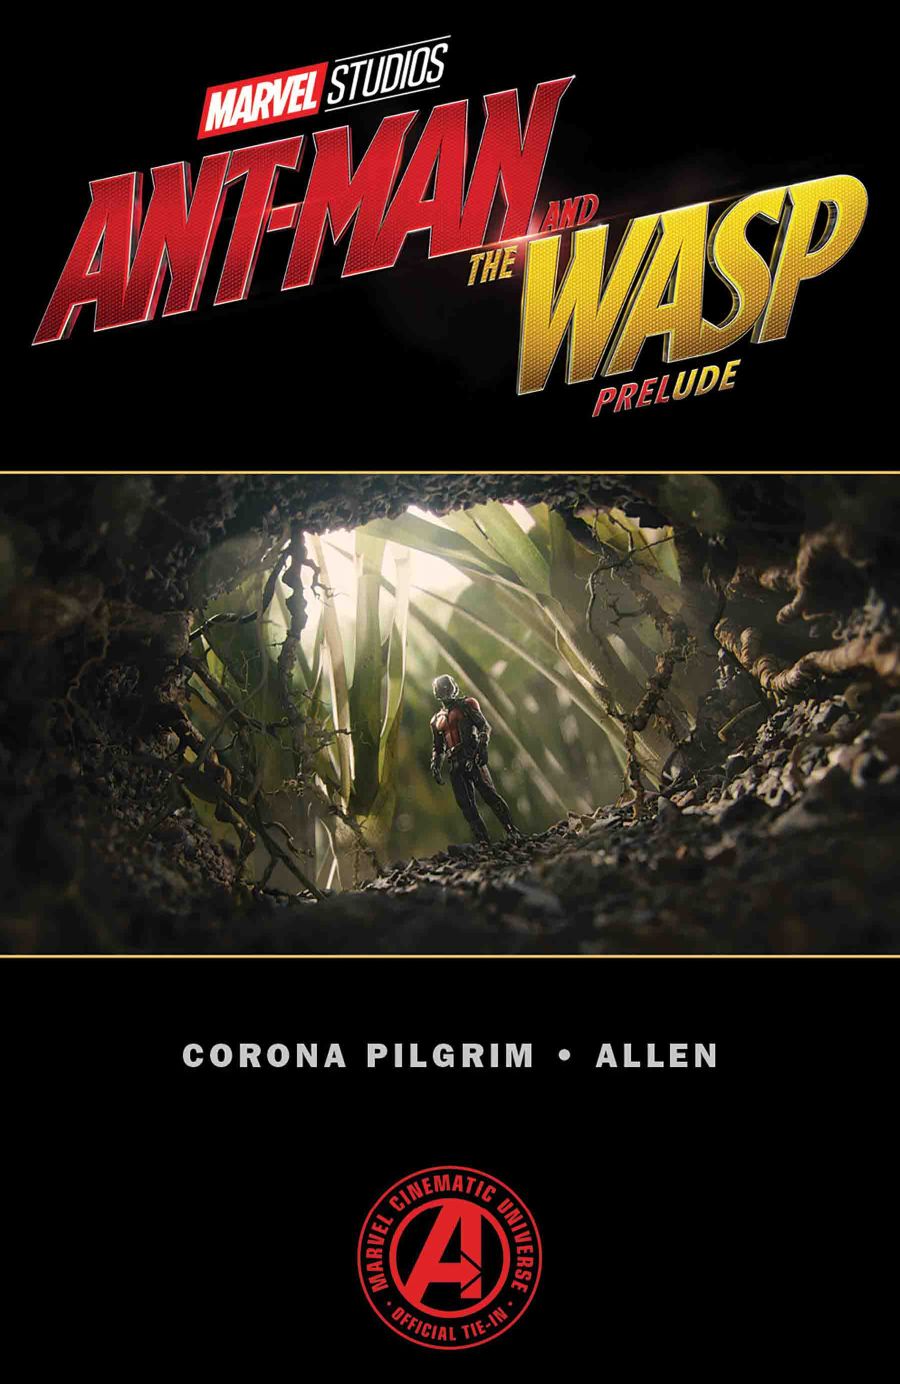 ANT-MAN AND THE WASP PRELUDE #1 (of 2)